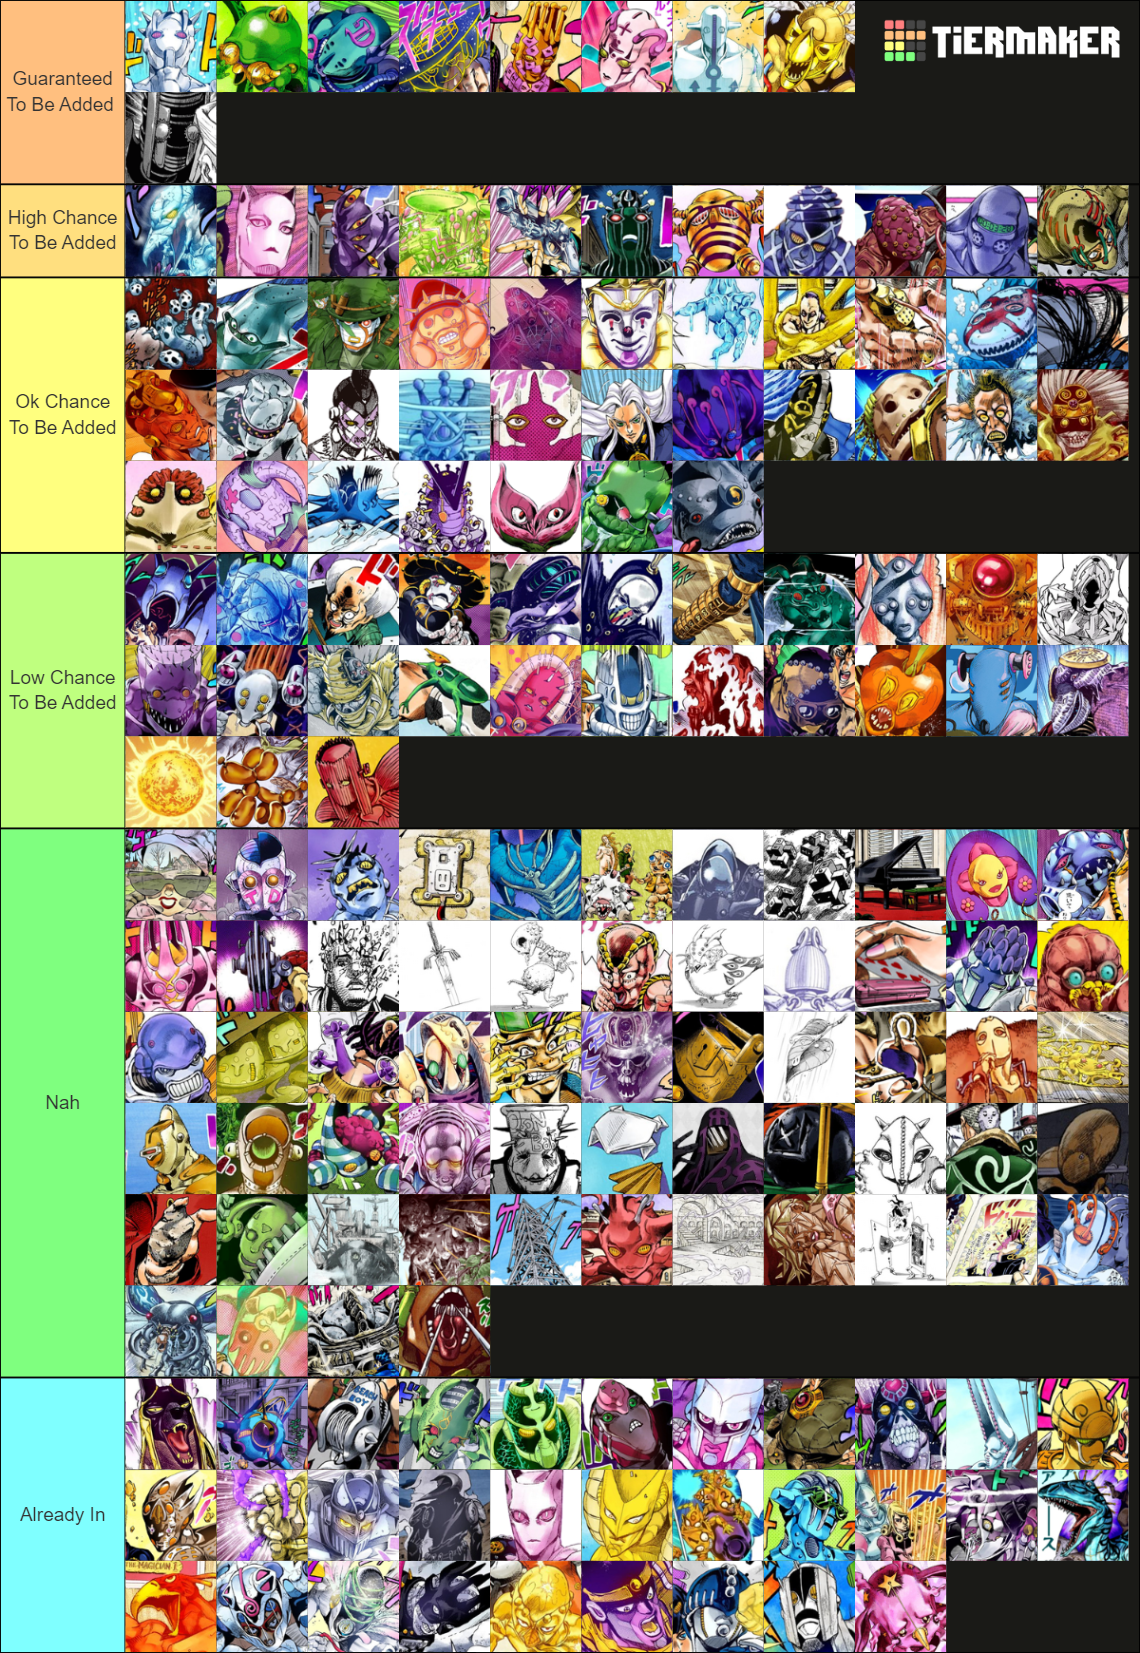 Create a YBA (SOFT AND WET UPDATE) Tier List - TierMaker